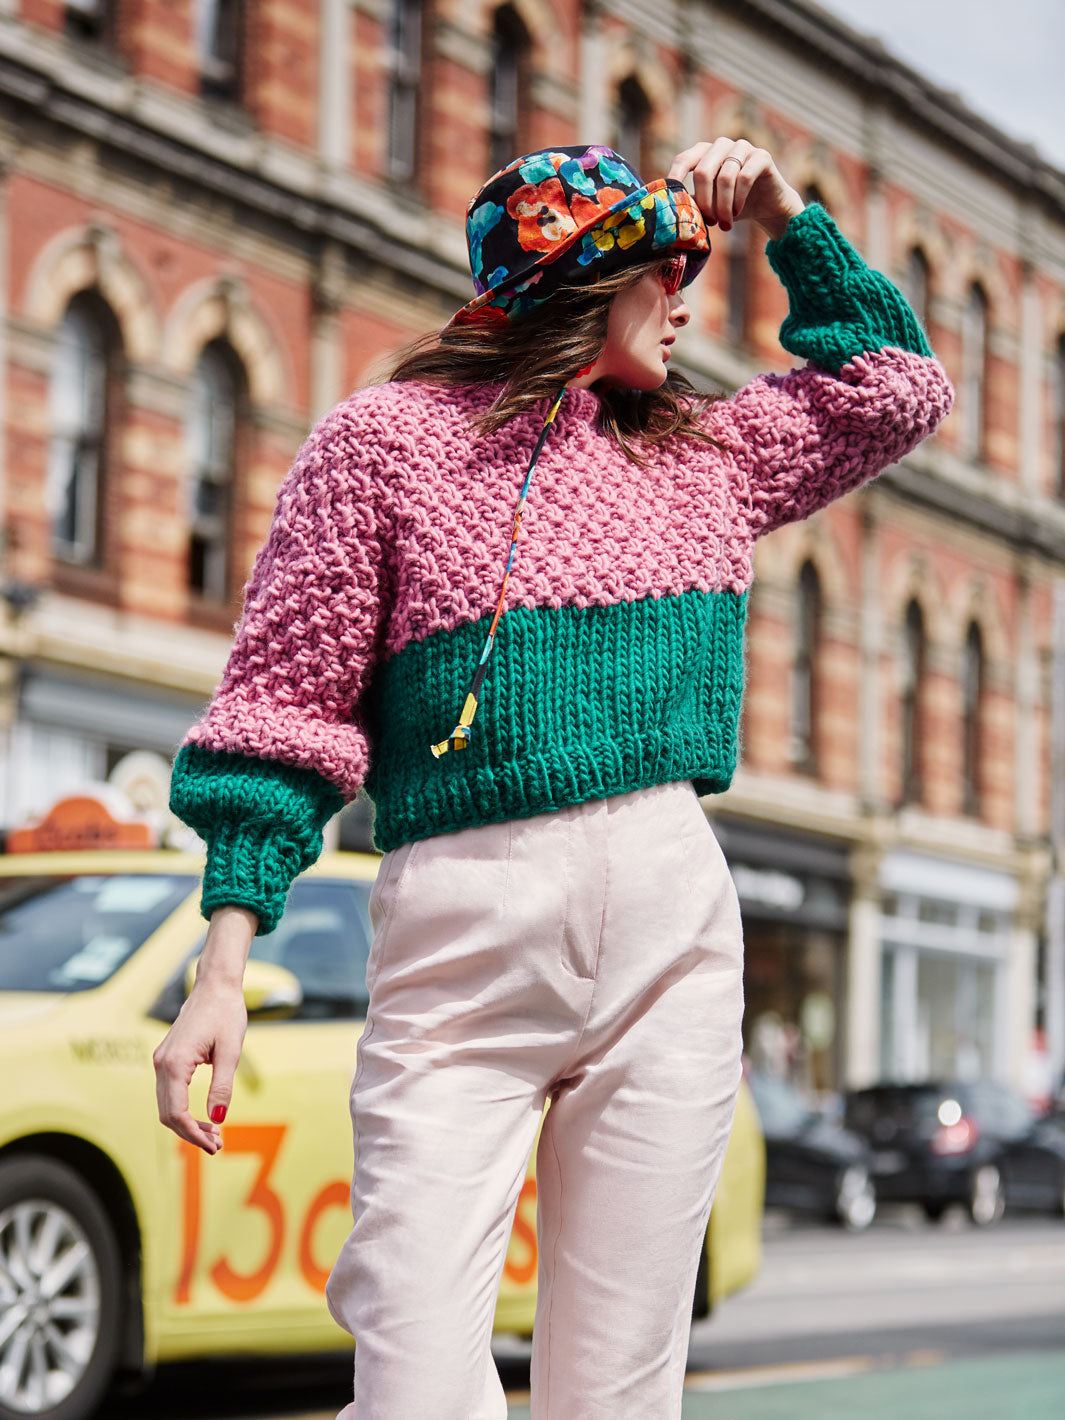 Girl wearing hat crosses a street in a chunky knitted jumper